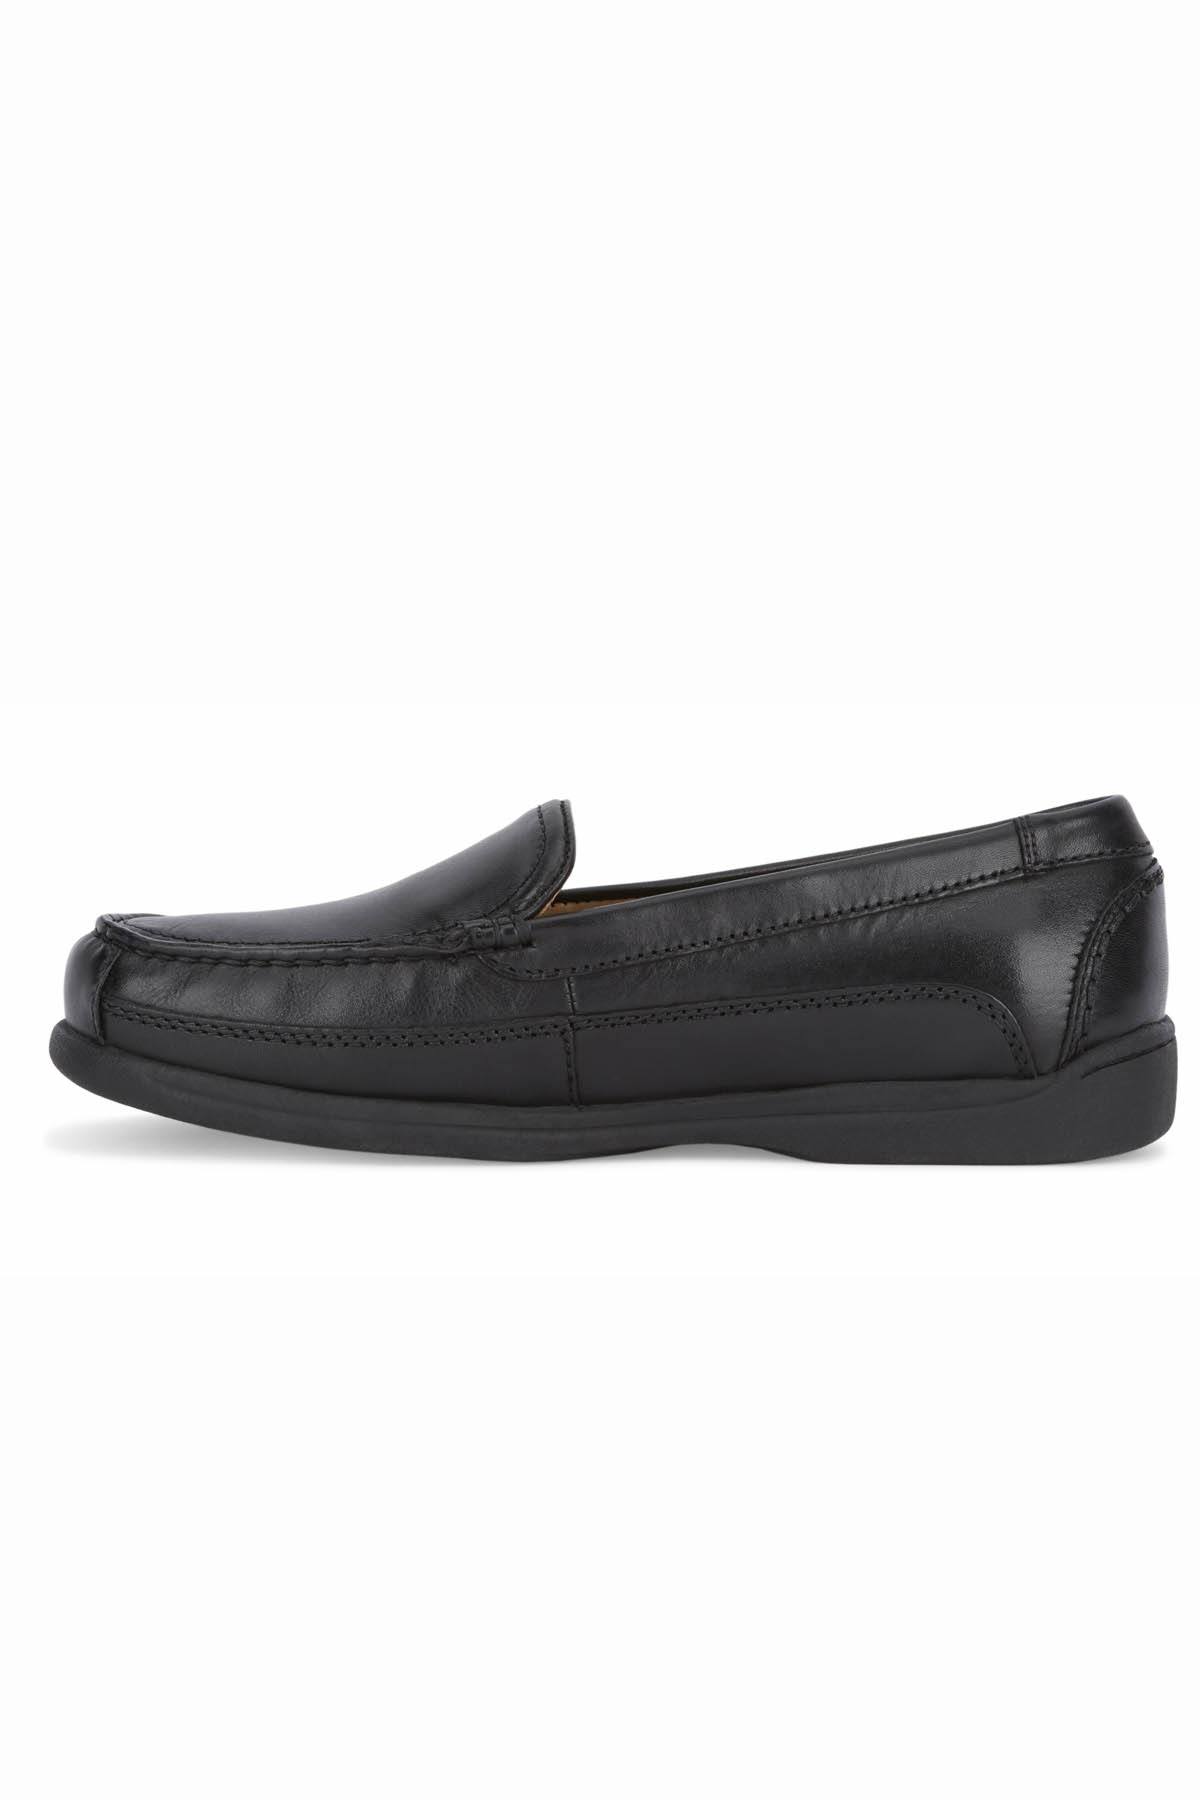 Dockers Black Catalina Casual Loafer